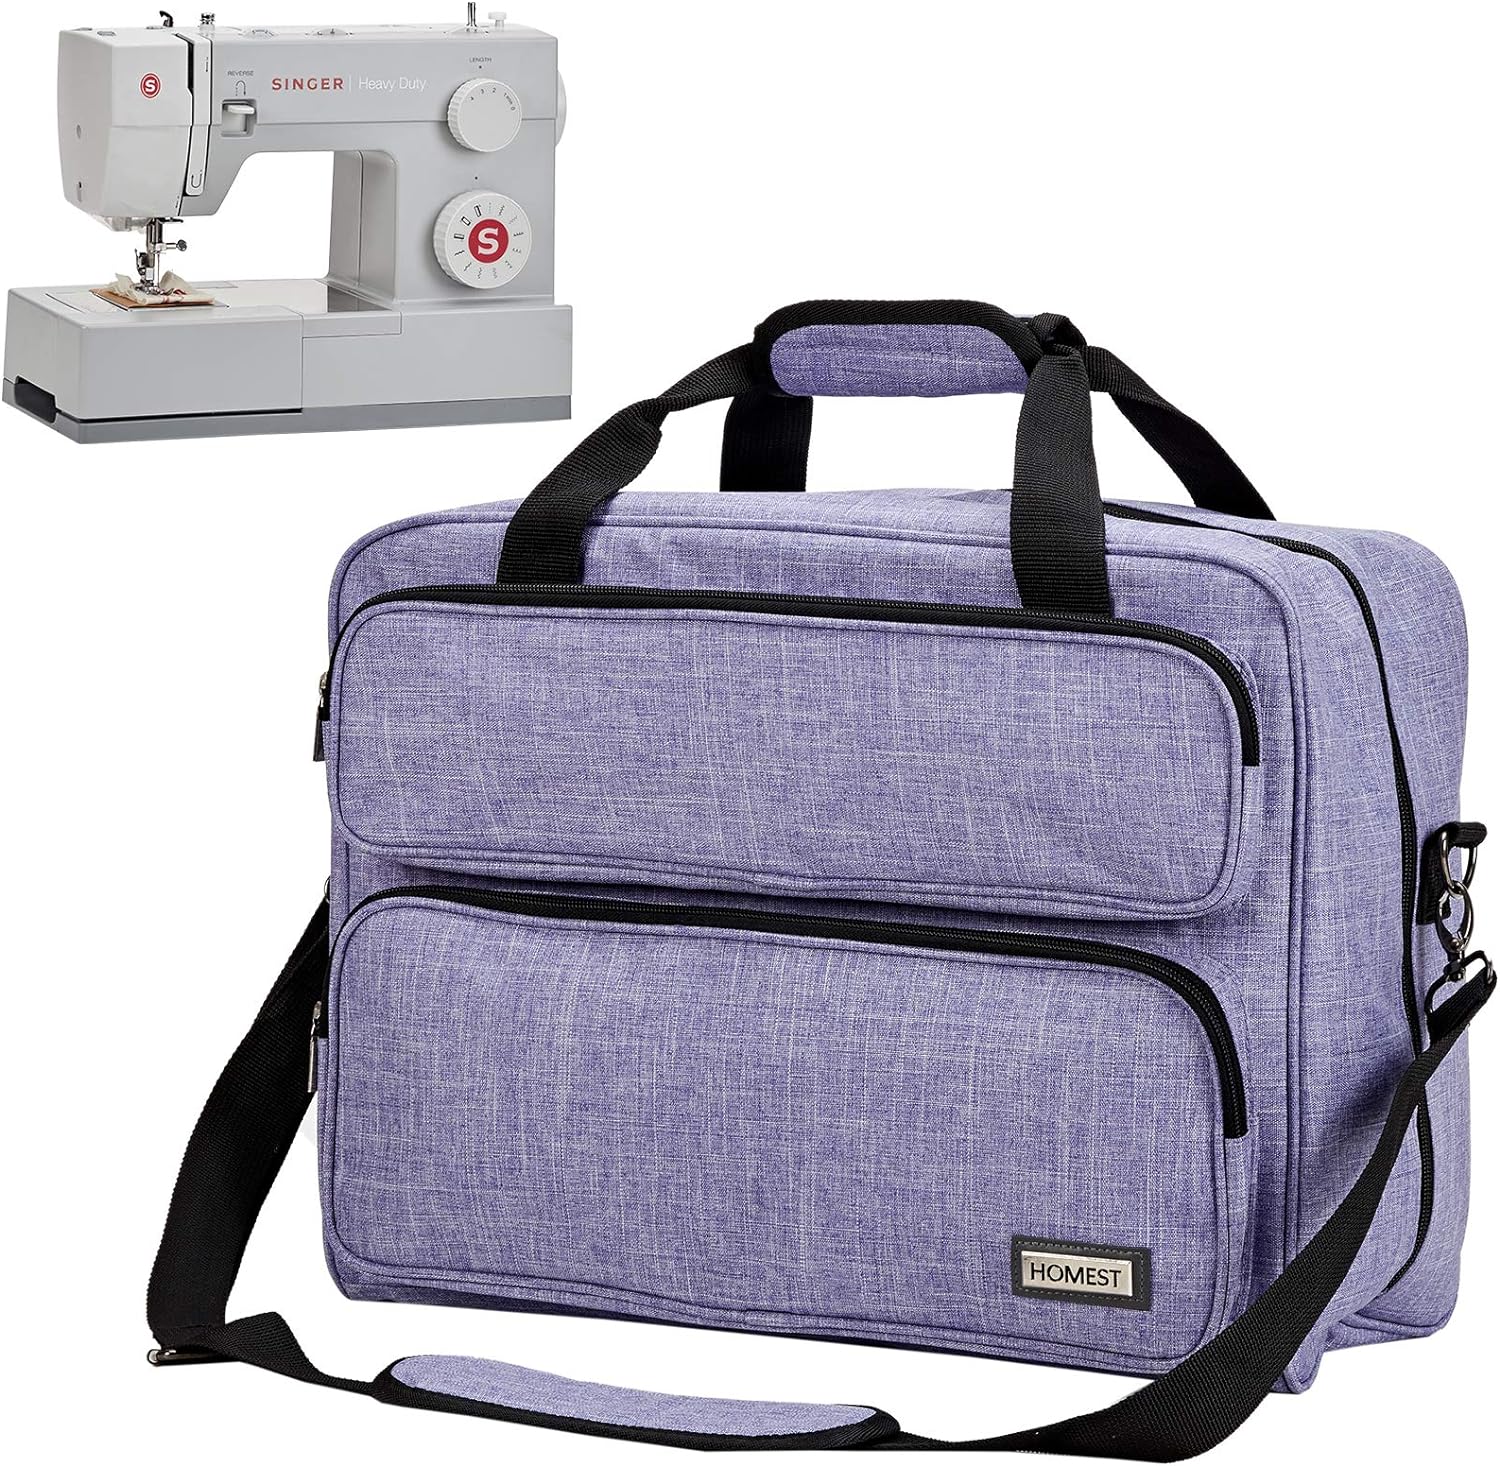 HOMEST Sewing Machine Carrying Case, Universal Tote Bag with Shoulder Strap Compatible with Most Standard Singer, Brother, Janome, Purple (Patent Design)